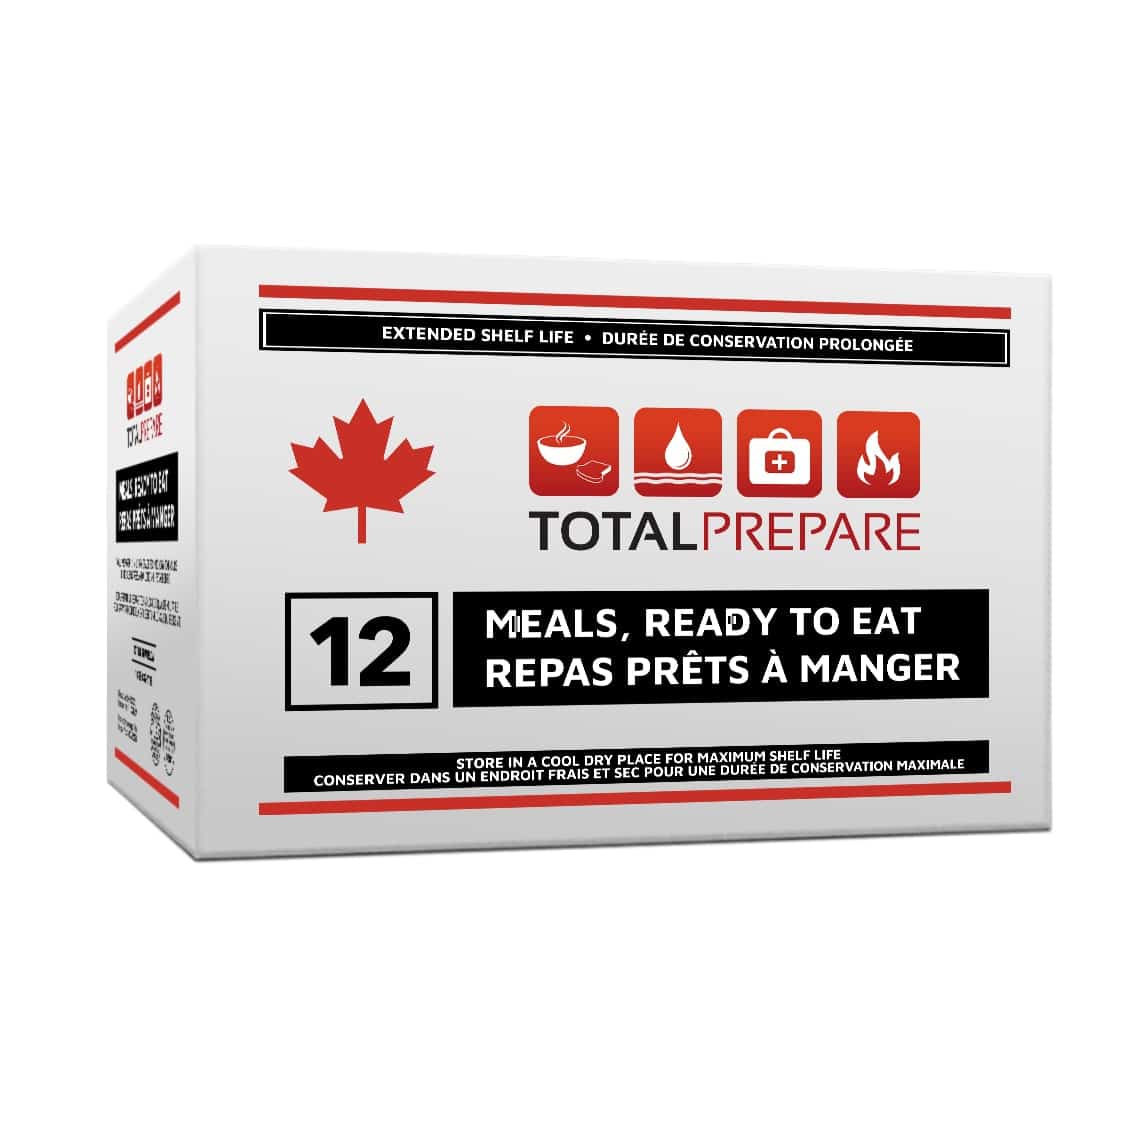 A Case of Total Prepare MREs or Meals Ready to Eat. Canadian MRE.